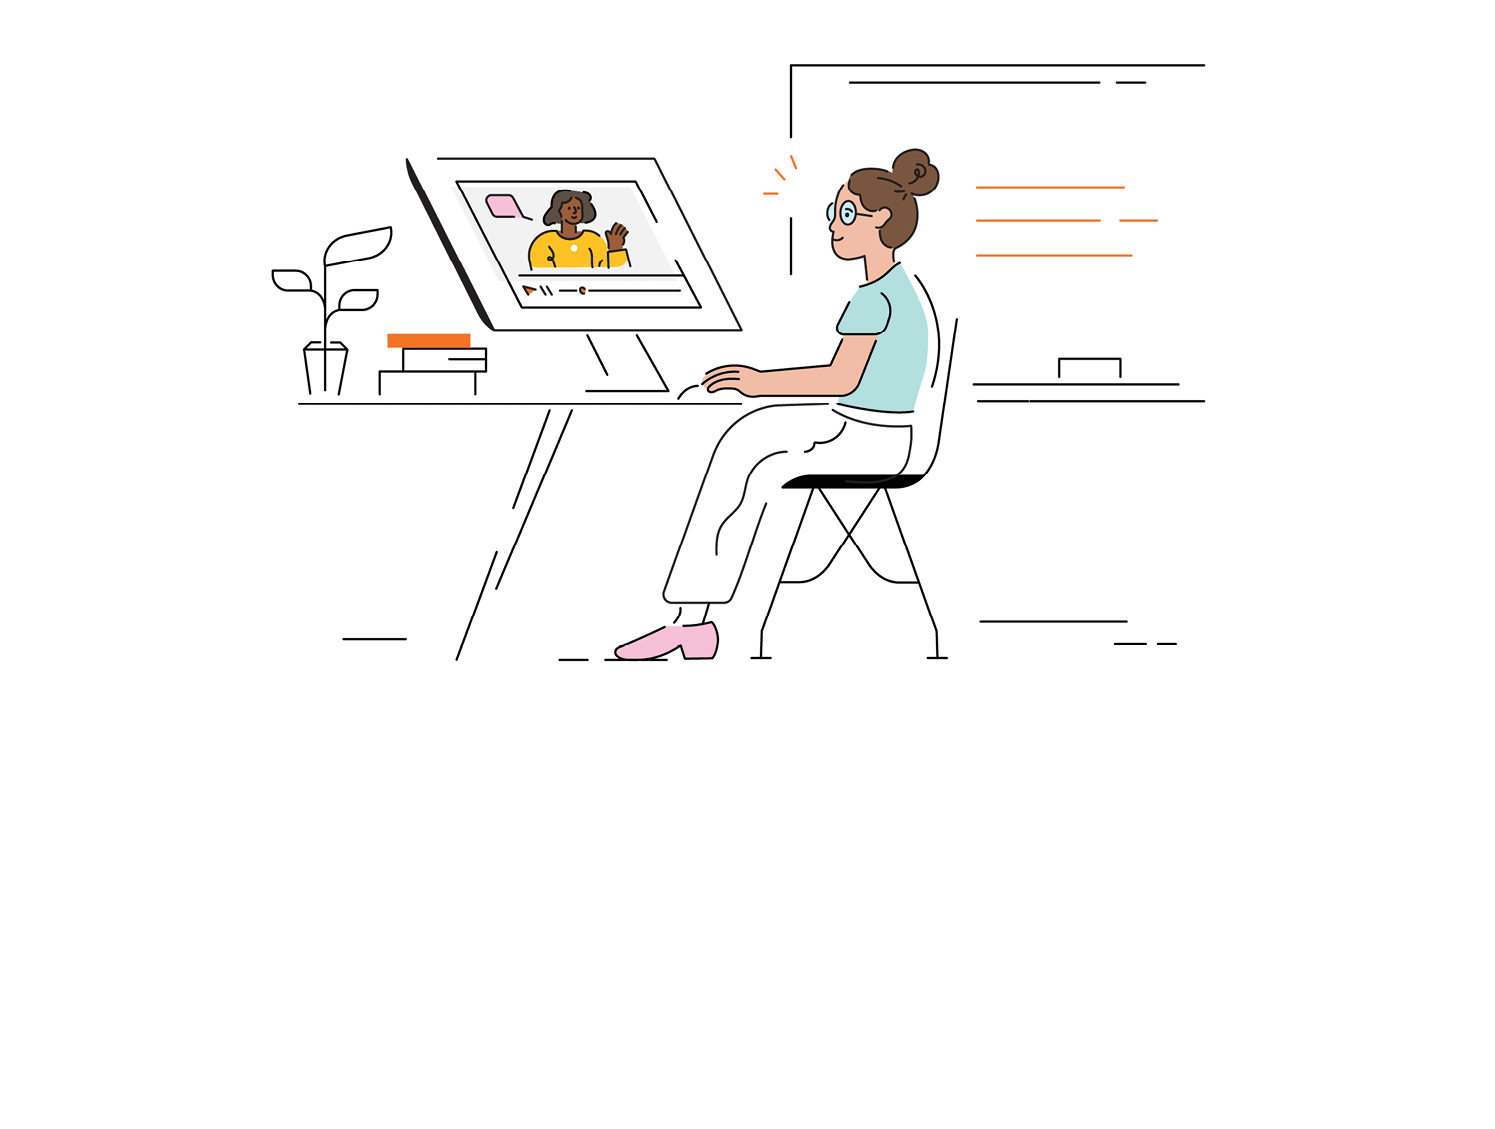 A woman sitting at a desk, working on a computer with an image of a family displayed on the screen, in a minimalist style office, exploring Amplify Science success stories.